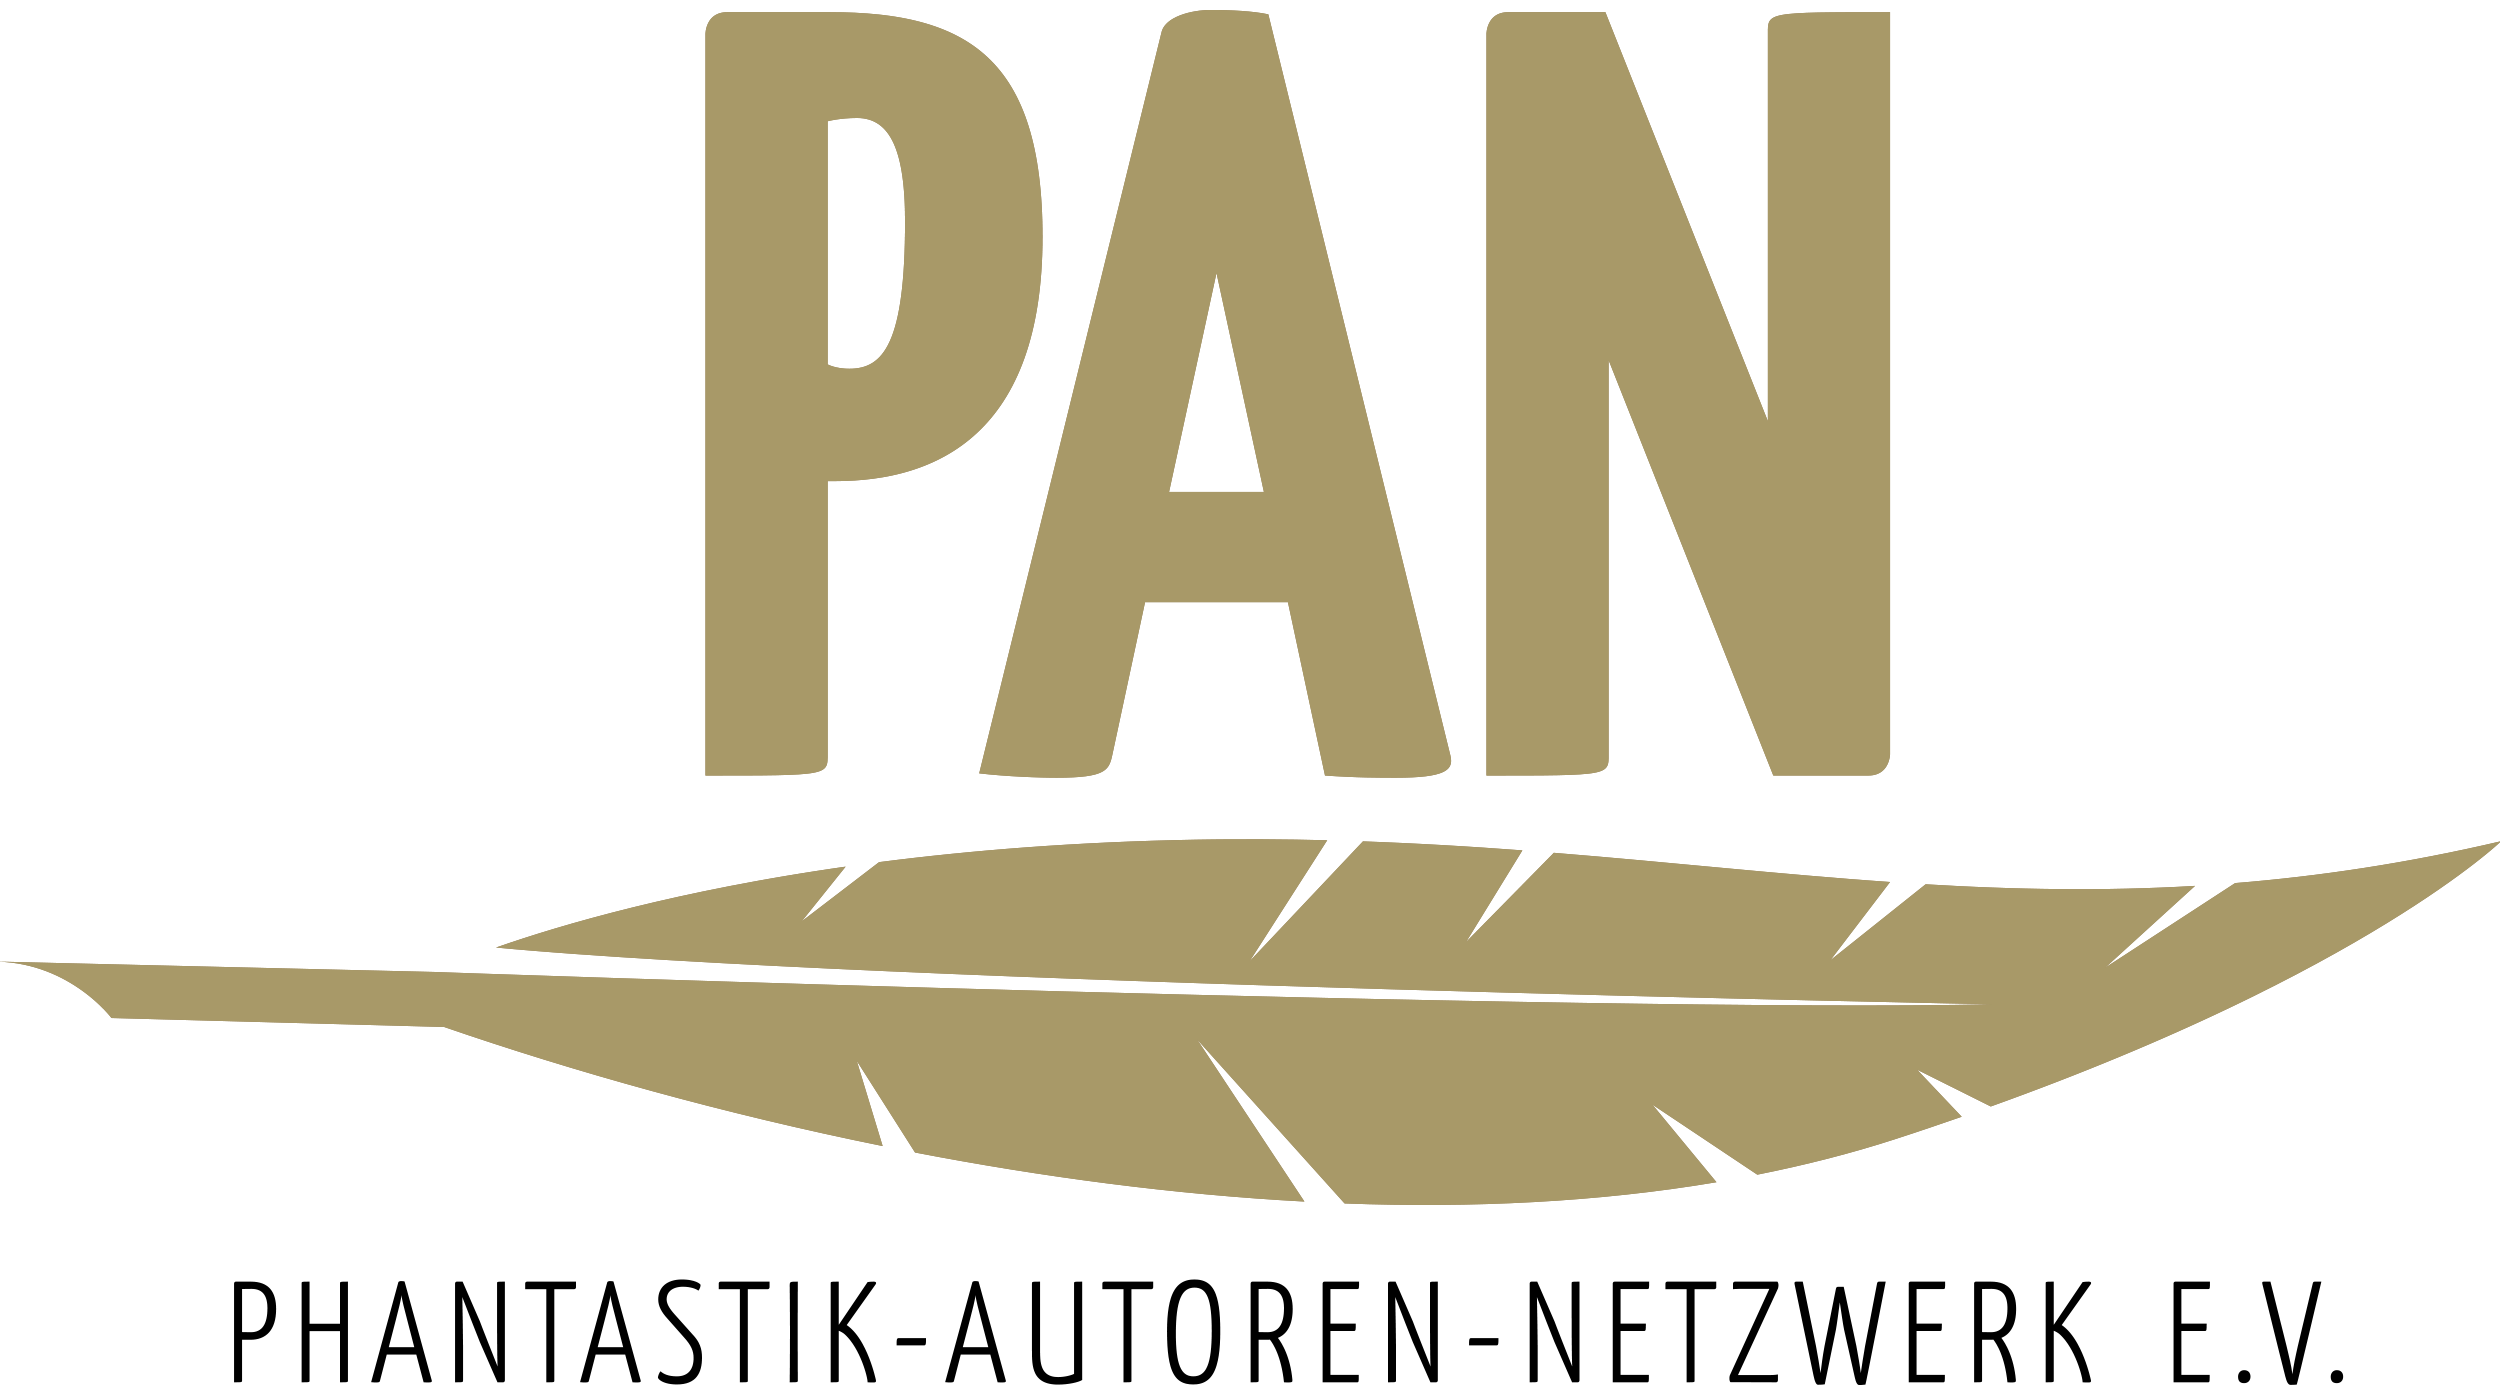 PAN Authors Network